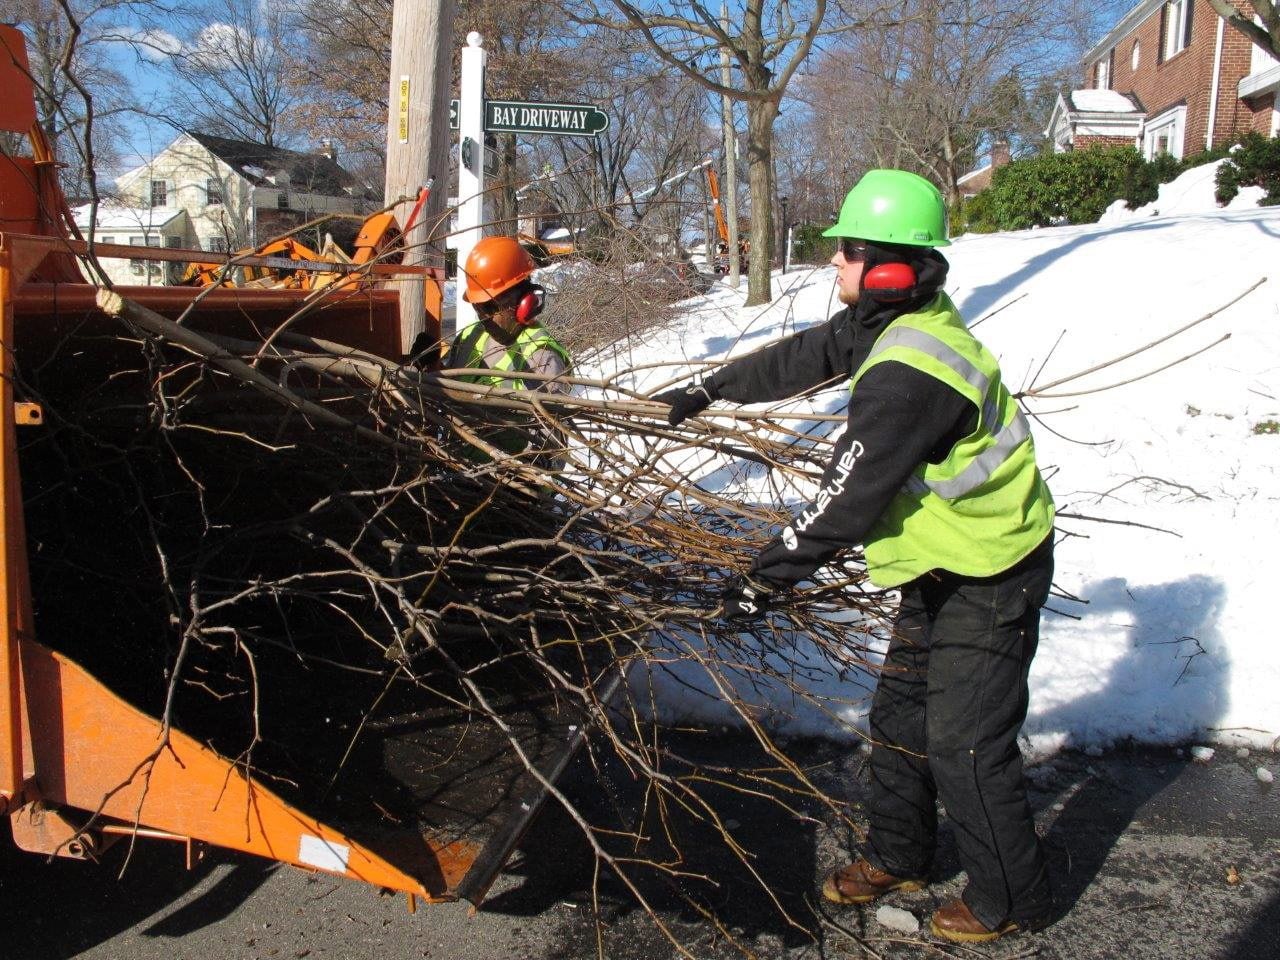 John Gorman, right, and Jose Campos, left, employees of Asplundh Tree Service, feed branches into a wood chipper in Plandome Heights, N.Y. The electric utility PSEG Long Island hires contractors such as Asplundh to perform tree trimming annually on trees in an effort to prevent power outages during snowstorms and other severe weather.